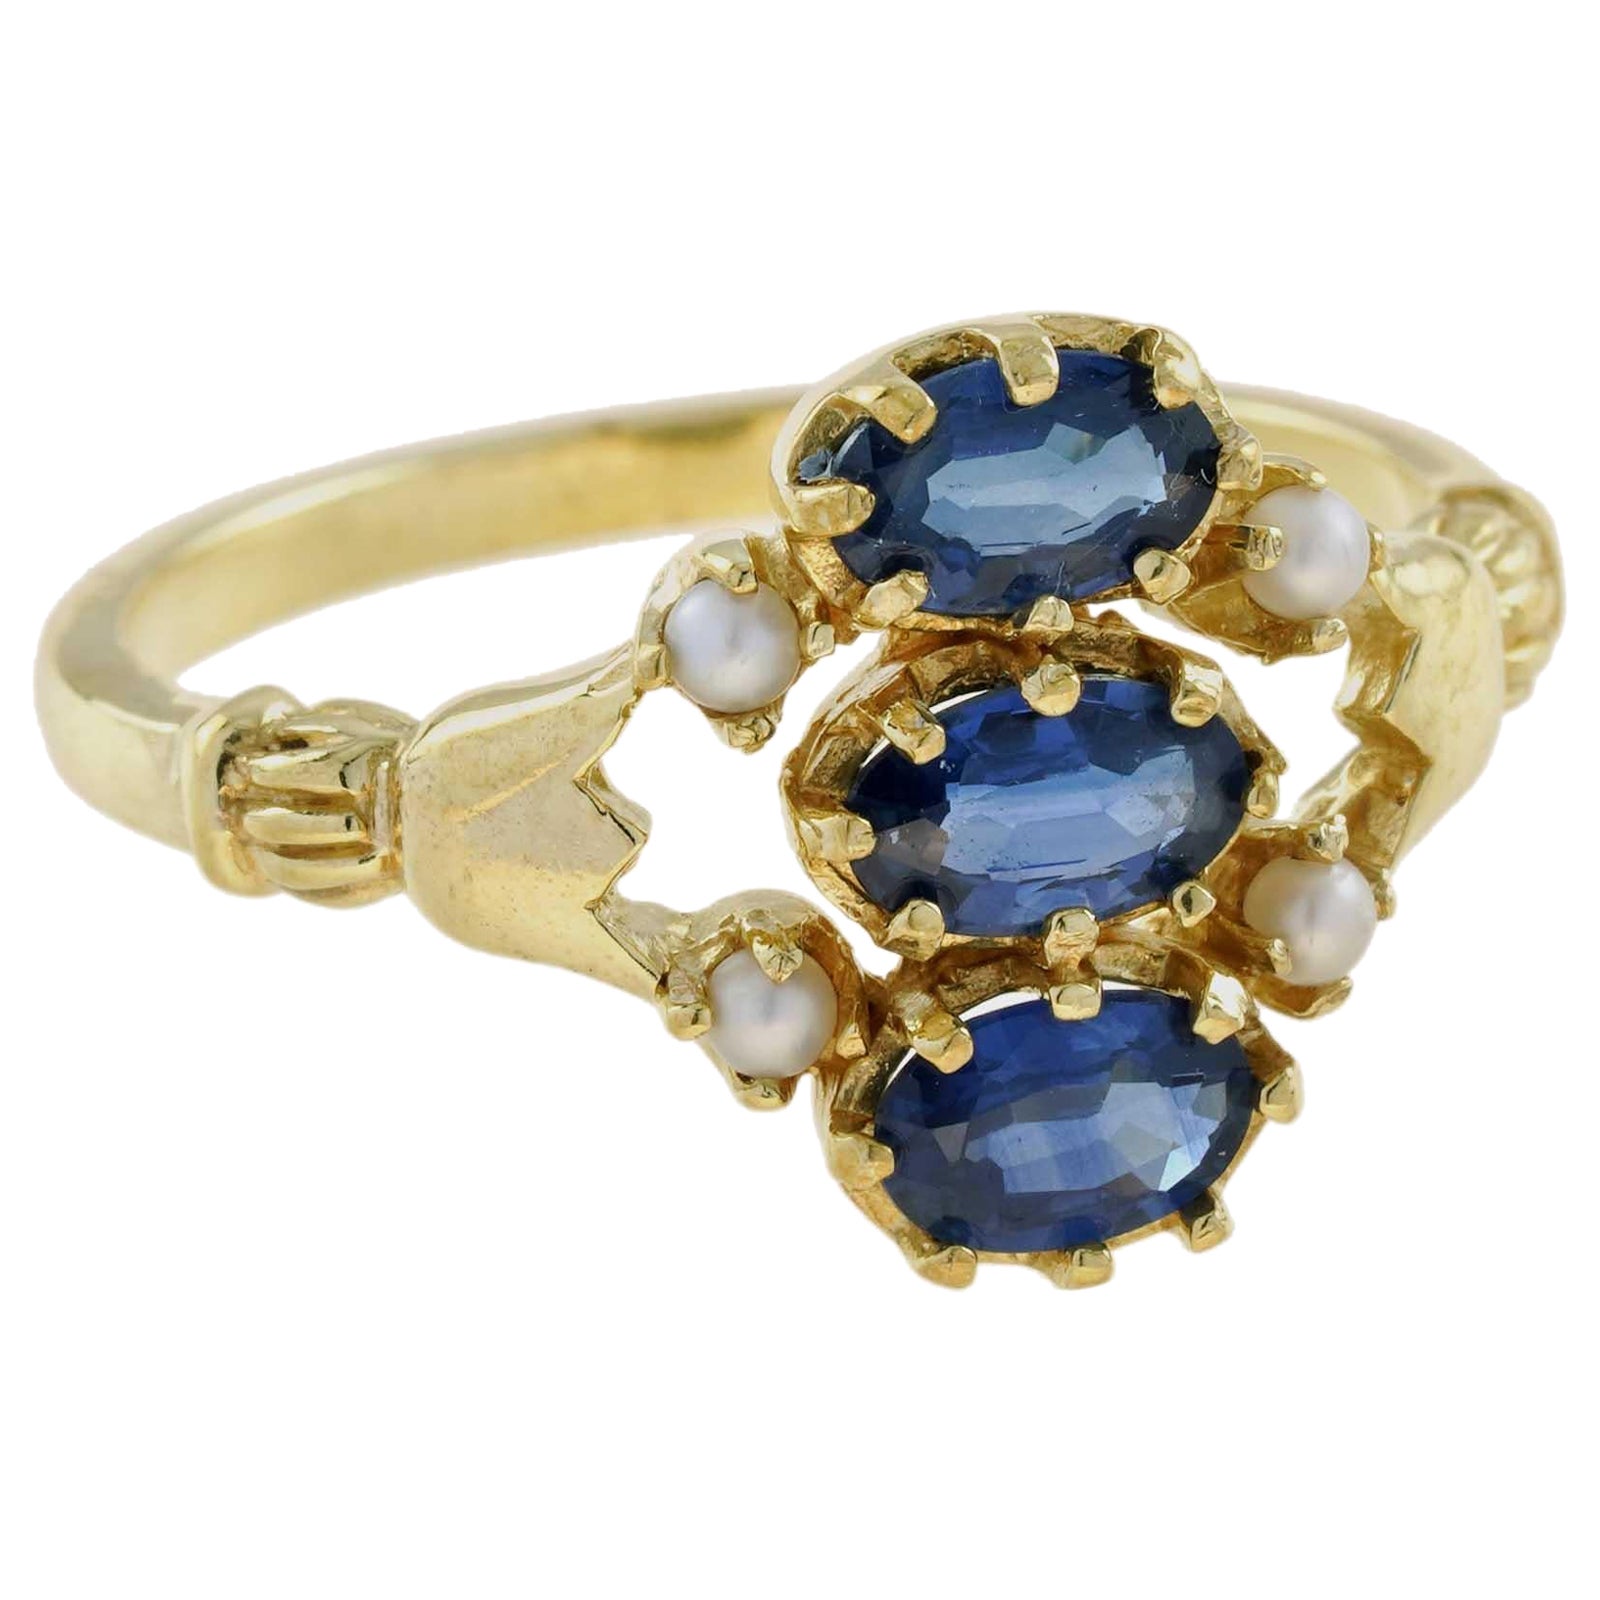 For Sale:  Natural Blue Sapphire and Pearl Vintage Style Three Stone Ring in Solid 9K Gold